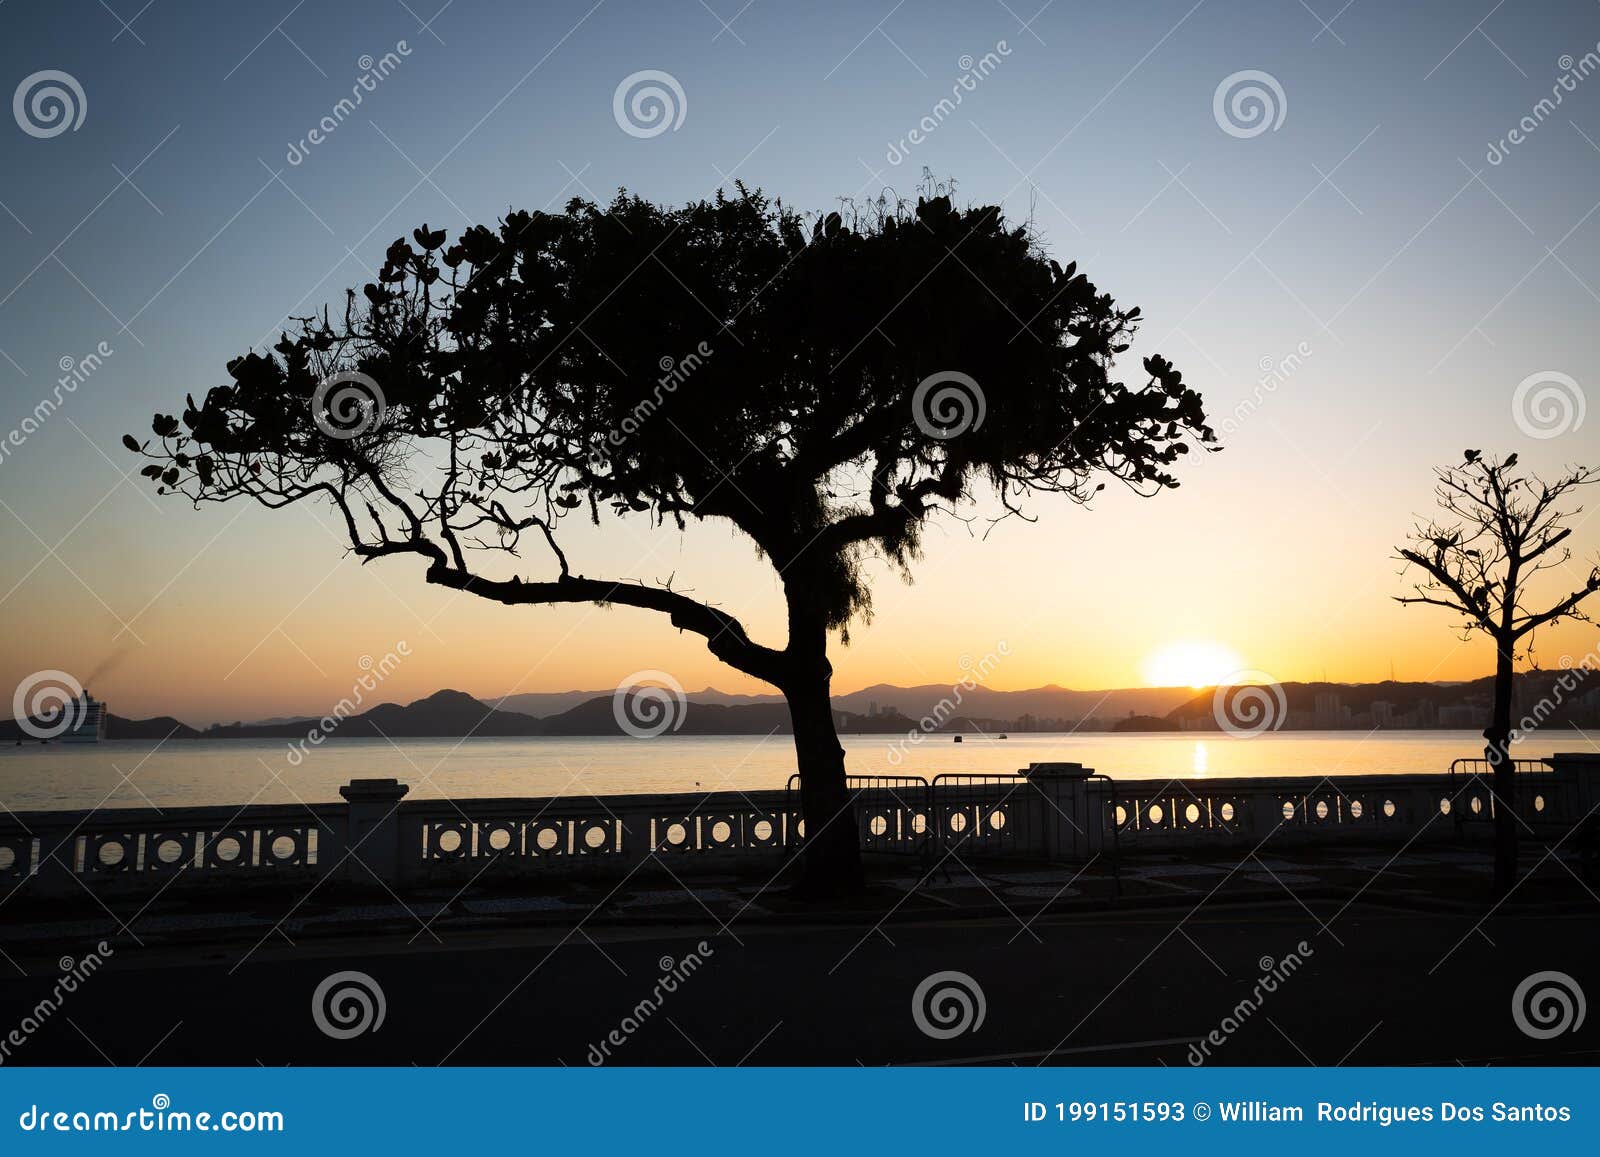 typical sunset in santos, brazil. in the foreground the  wall of the city of santos and the tropical almond tree terminalia